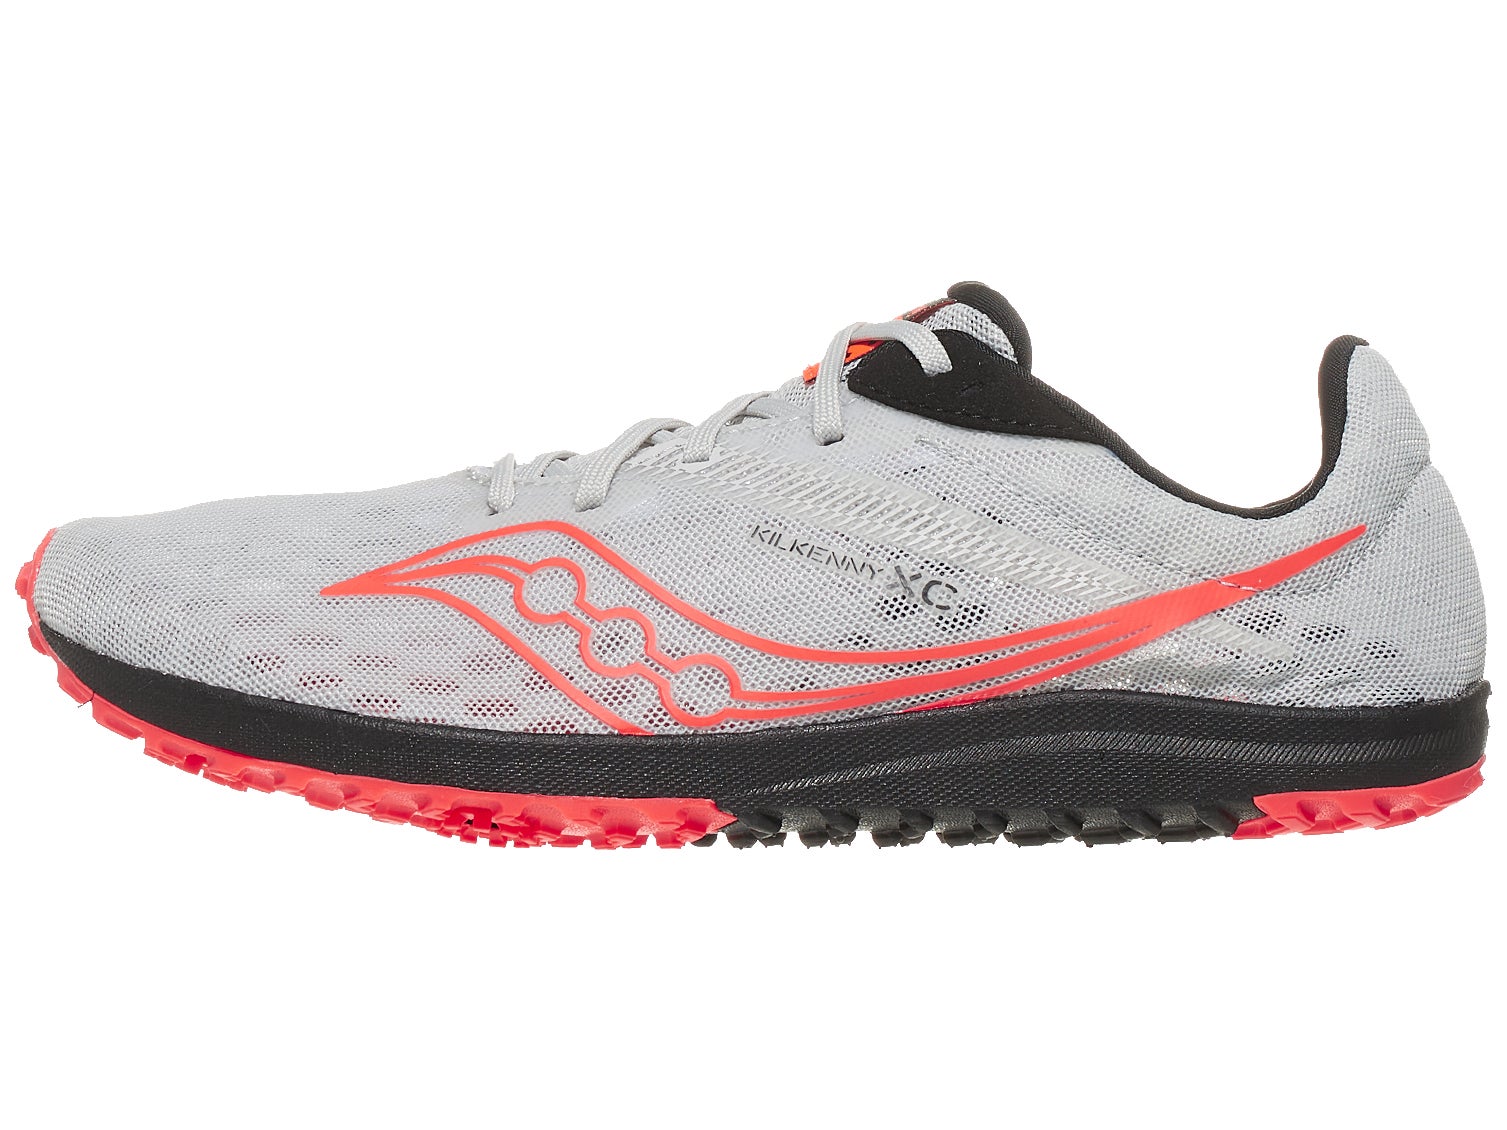 Saucony Women's Kilkenny Xc 9 Cross Country Running Shoes 